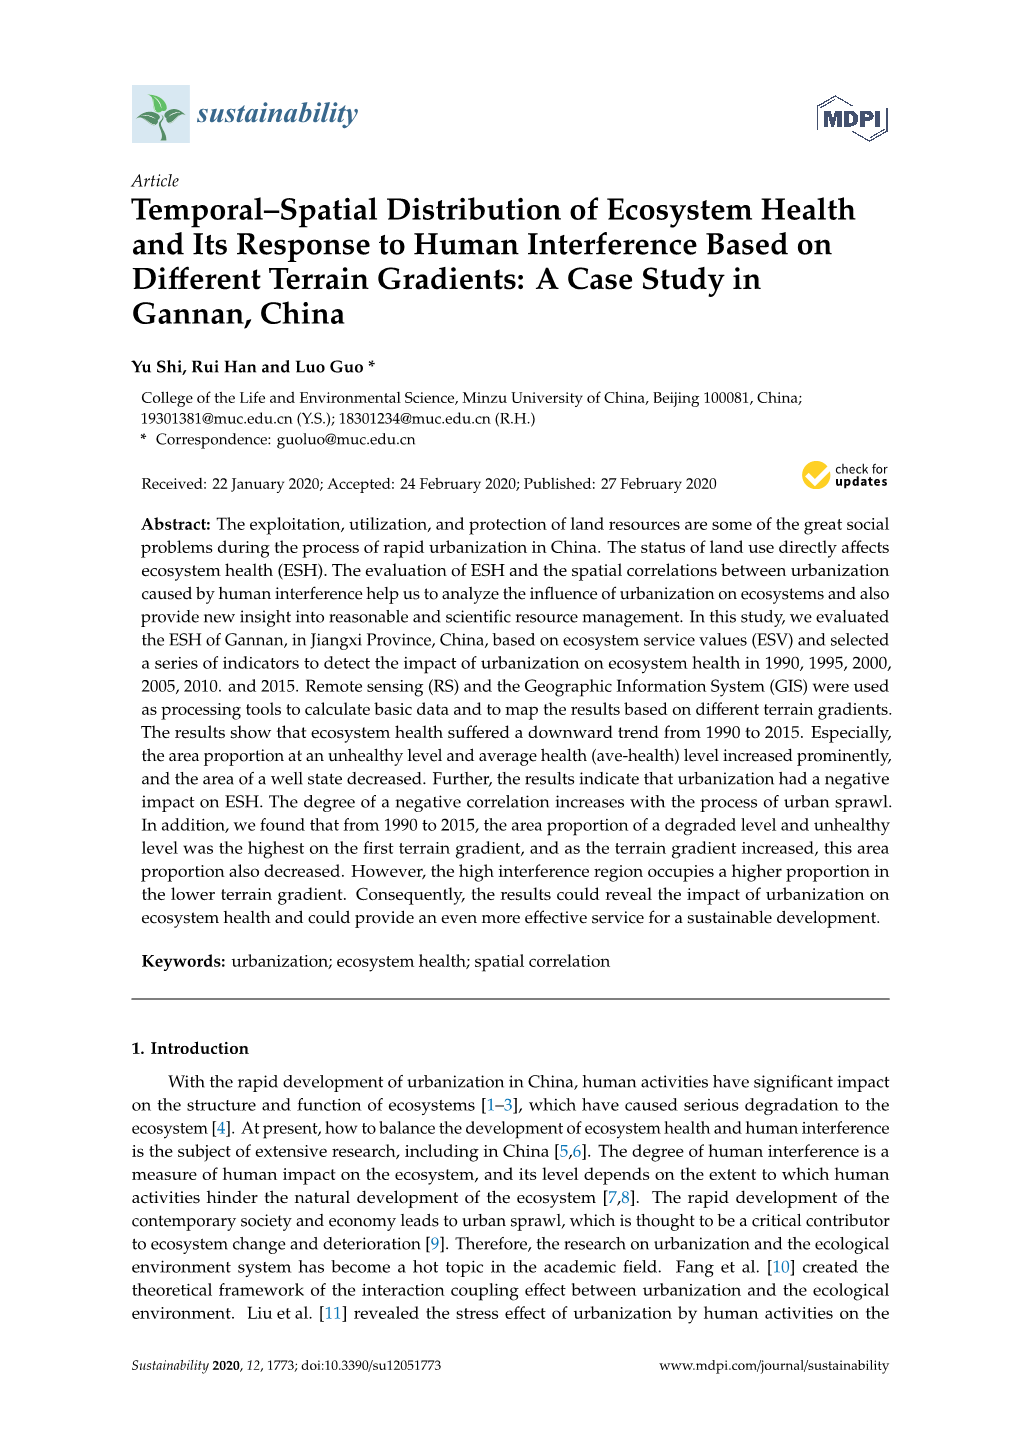 Temporal–Spatial Distribution of Ecosystem Health and Its Response to Human Interference Based on Diﬀerent Terrain Gradients: a Case Study in Gannan, China